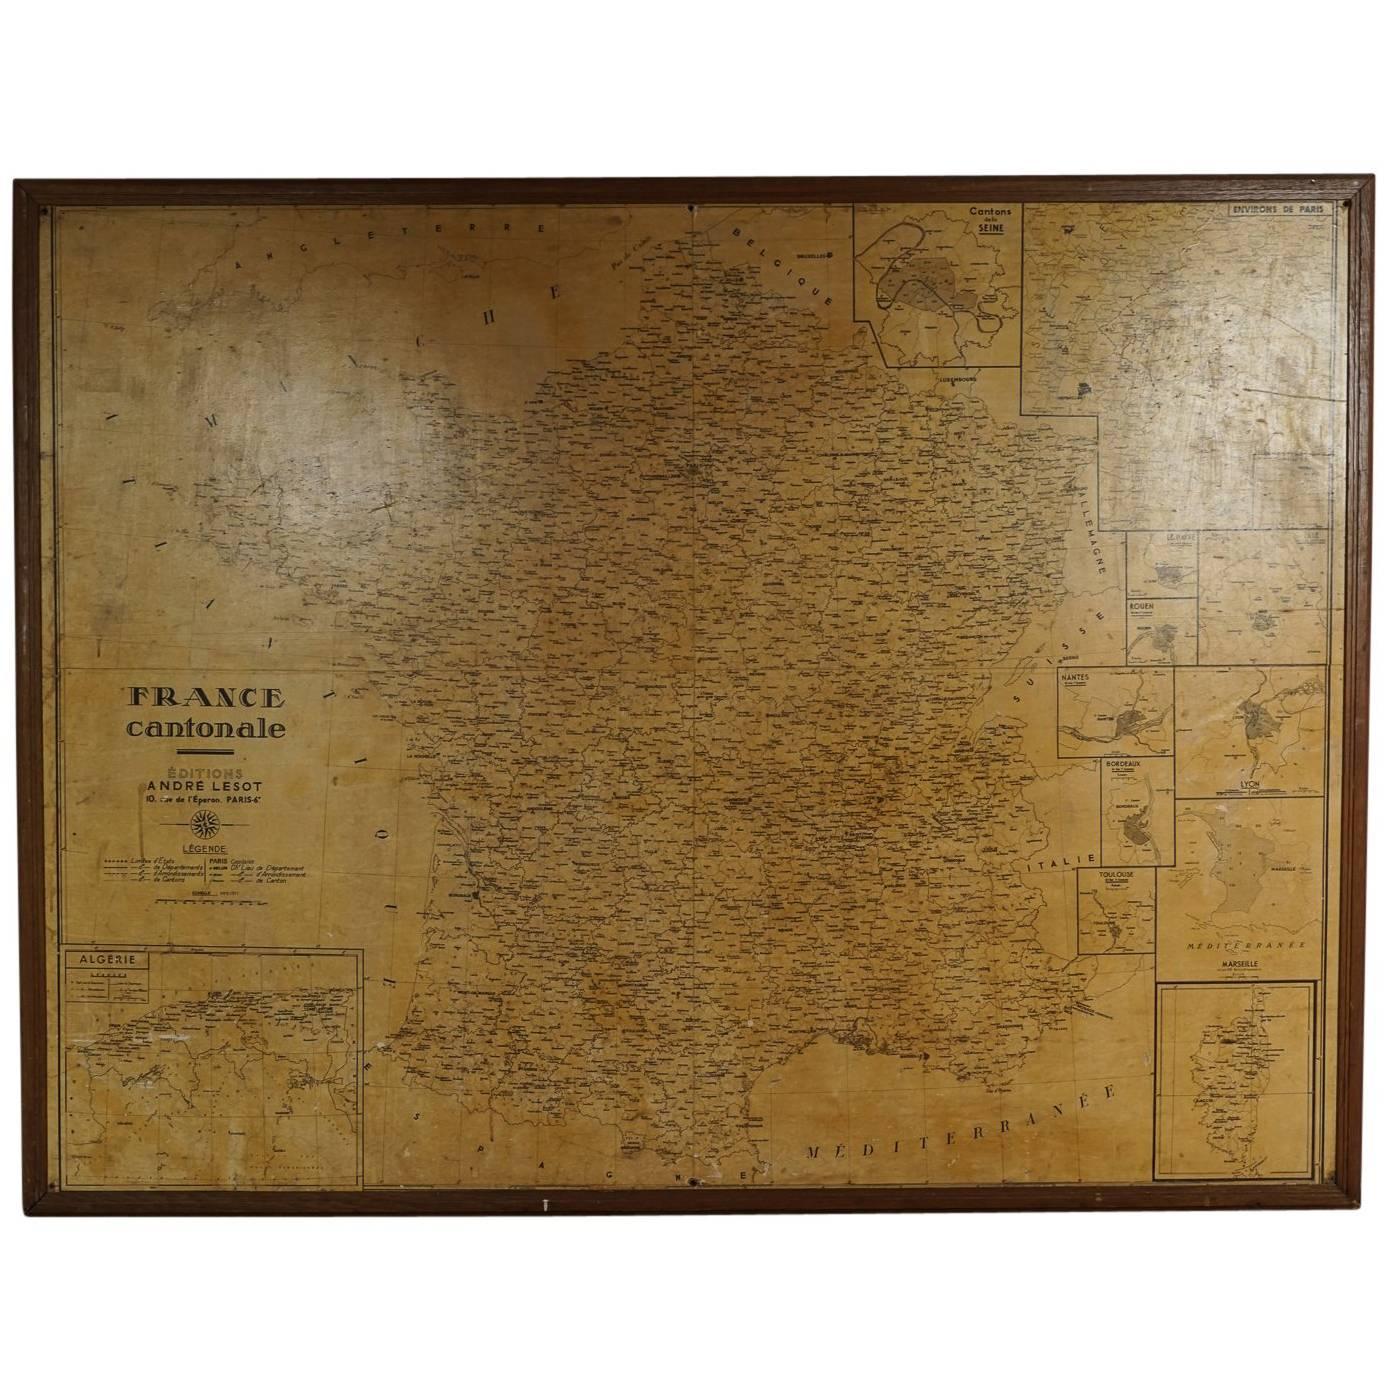 Large Framed School Map of France Drawn and Produced by Andre Lesot, Paris